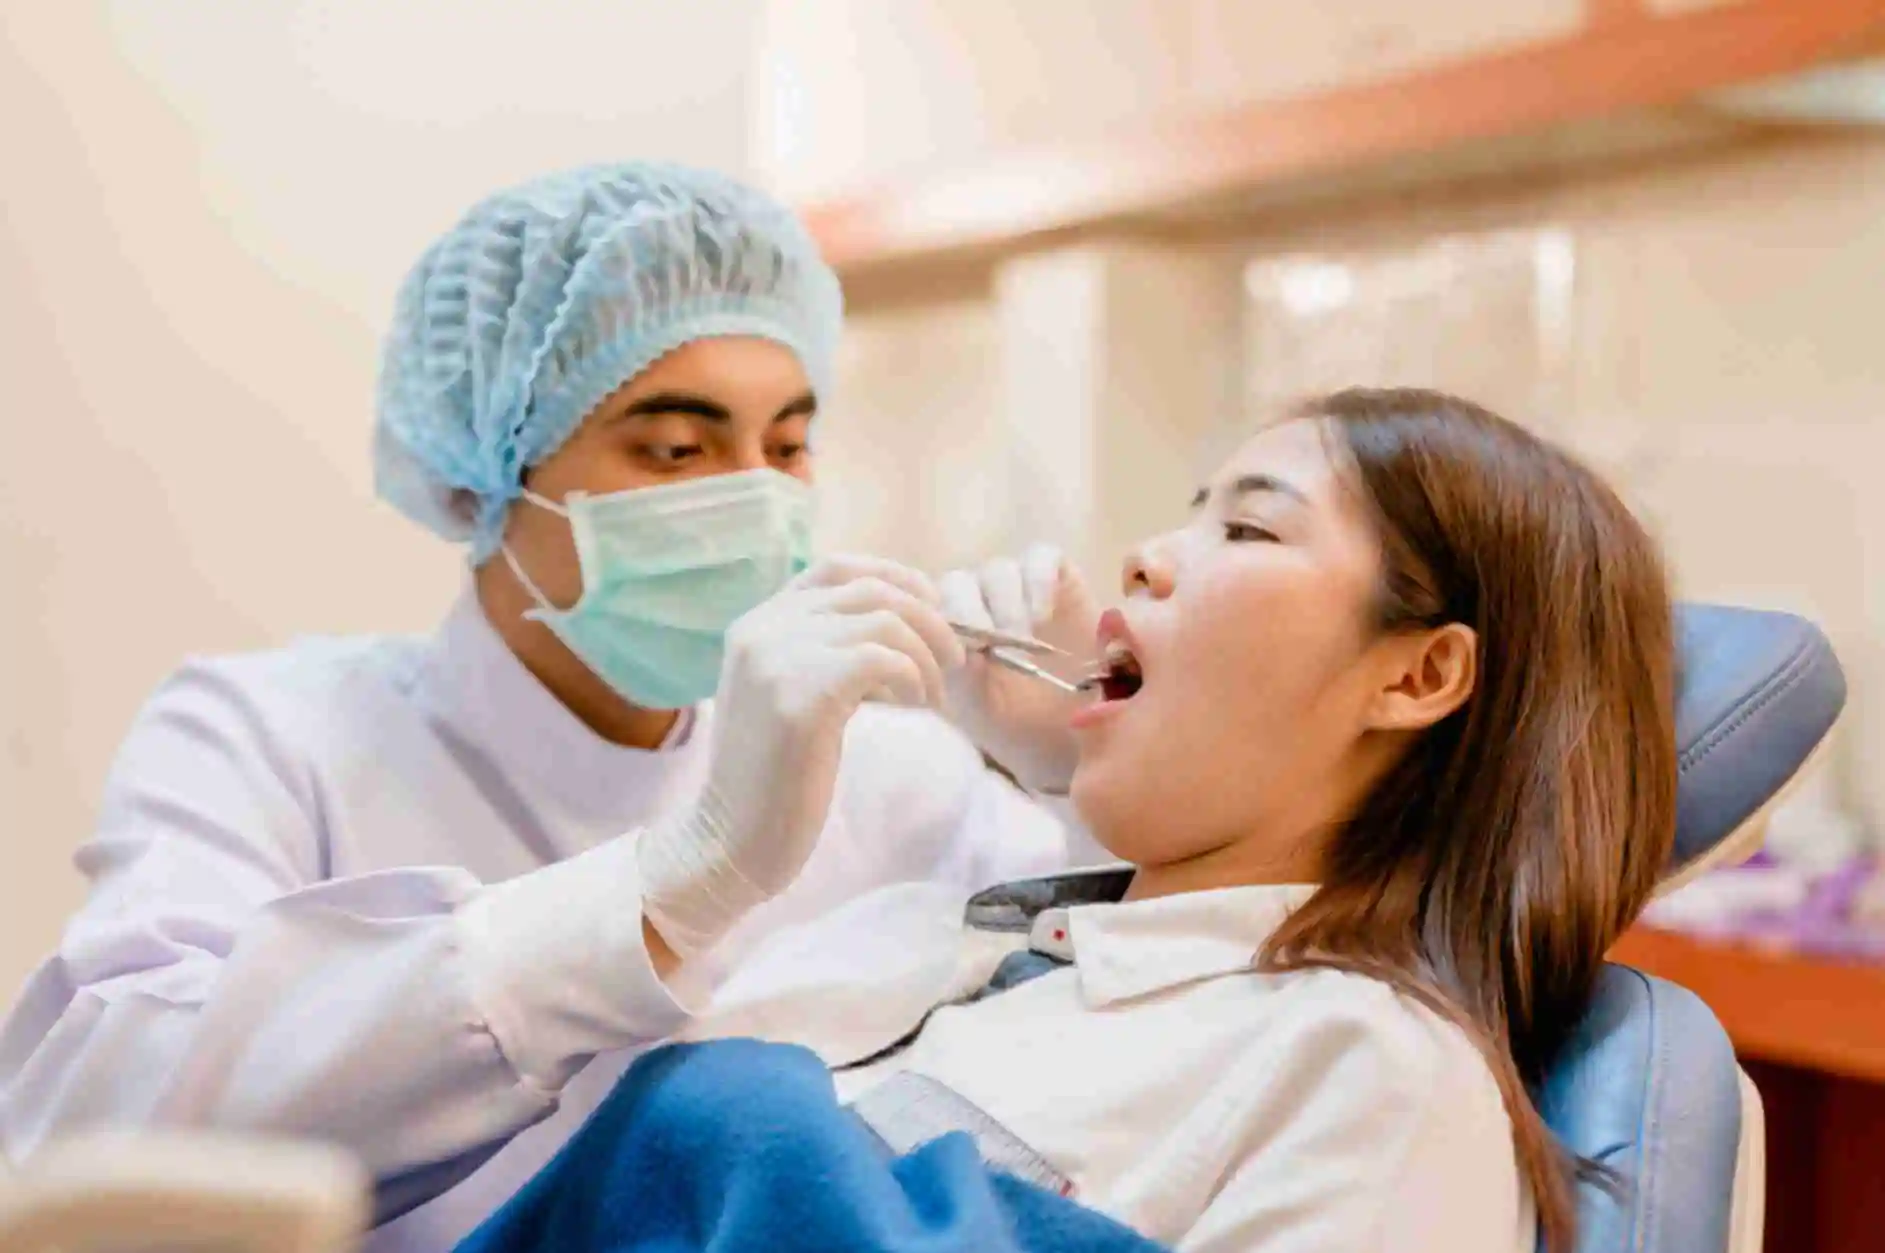 Gum disease service by access dental dentists